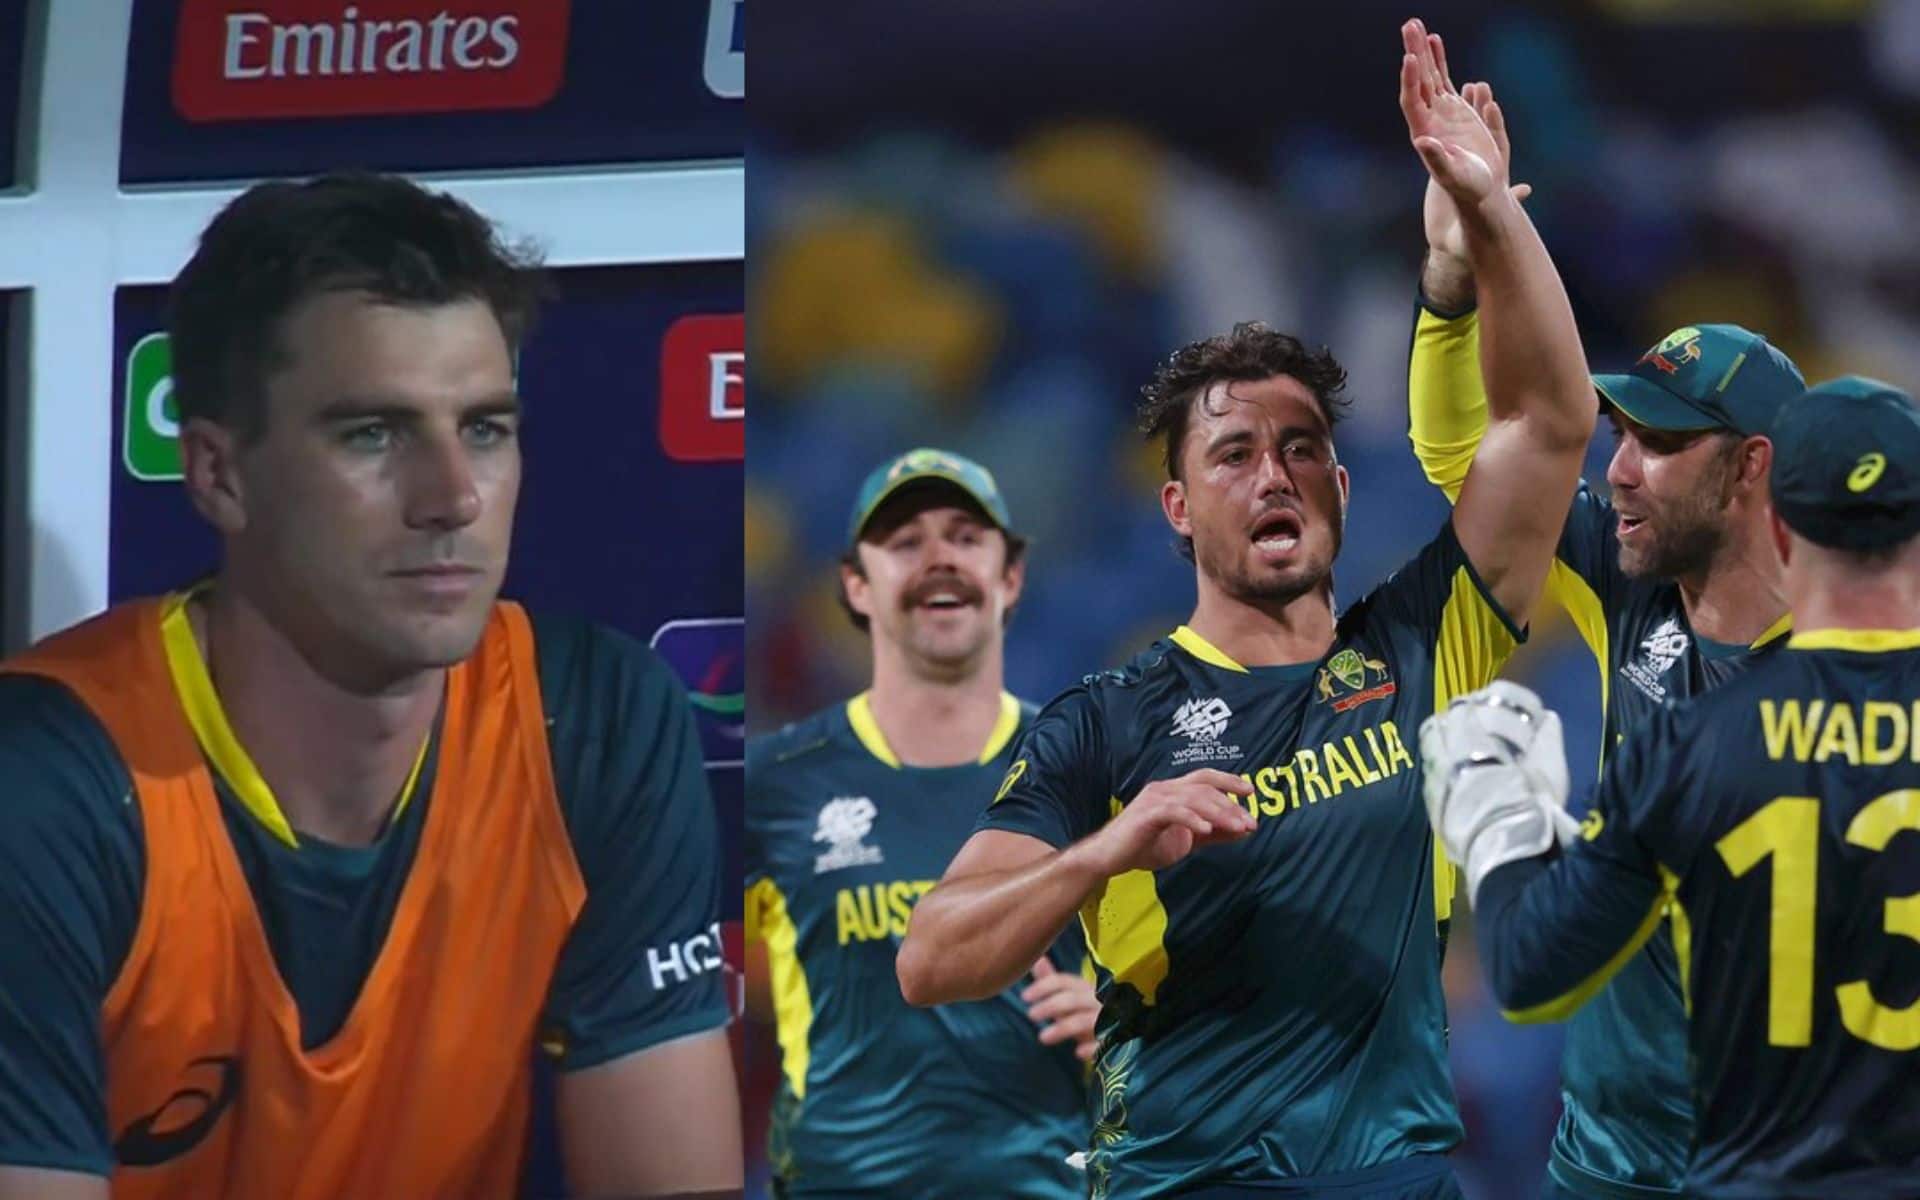 Pat Cummins To Replace...; Australia's Probable XI For T20 WC Match vs ENG